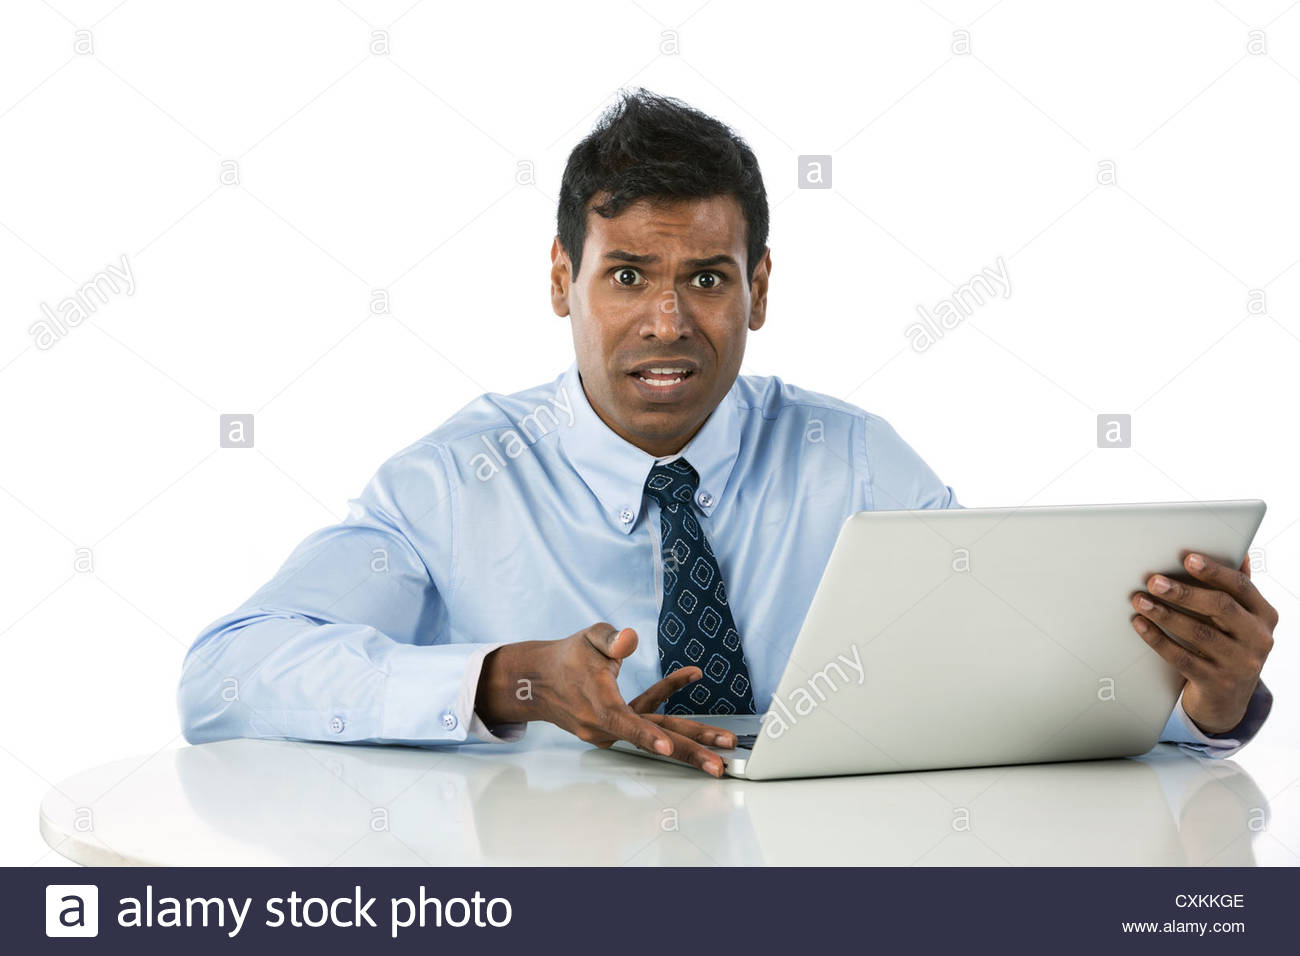 portrait-of-a-confused-indian-business-man-working-with-his-laptop-CXKKGE.jpg